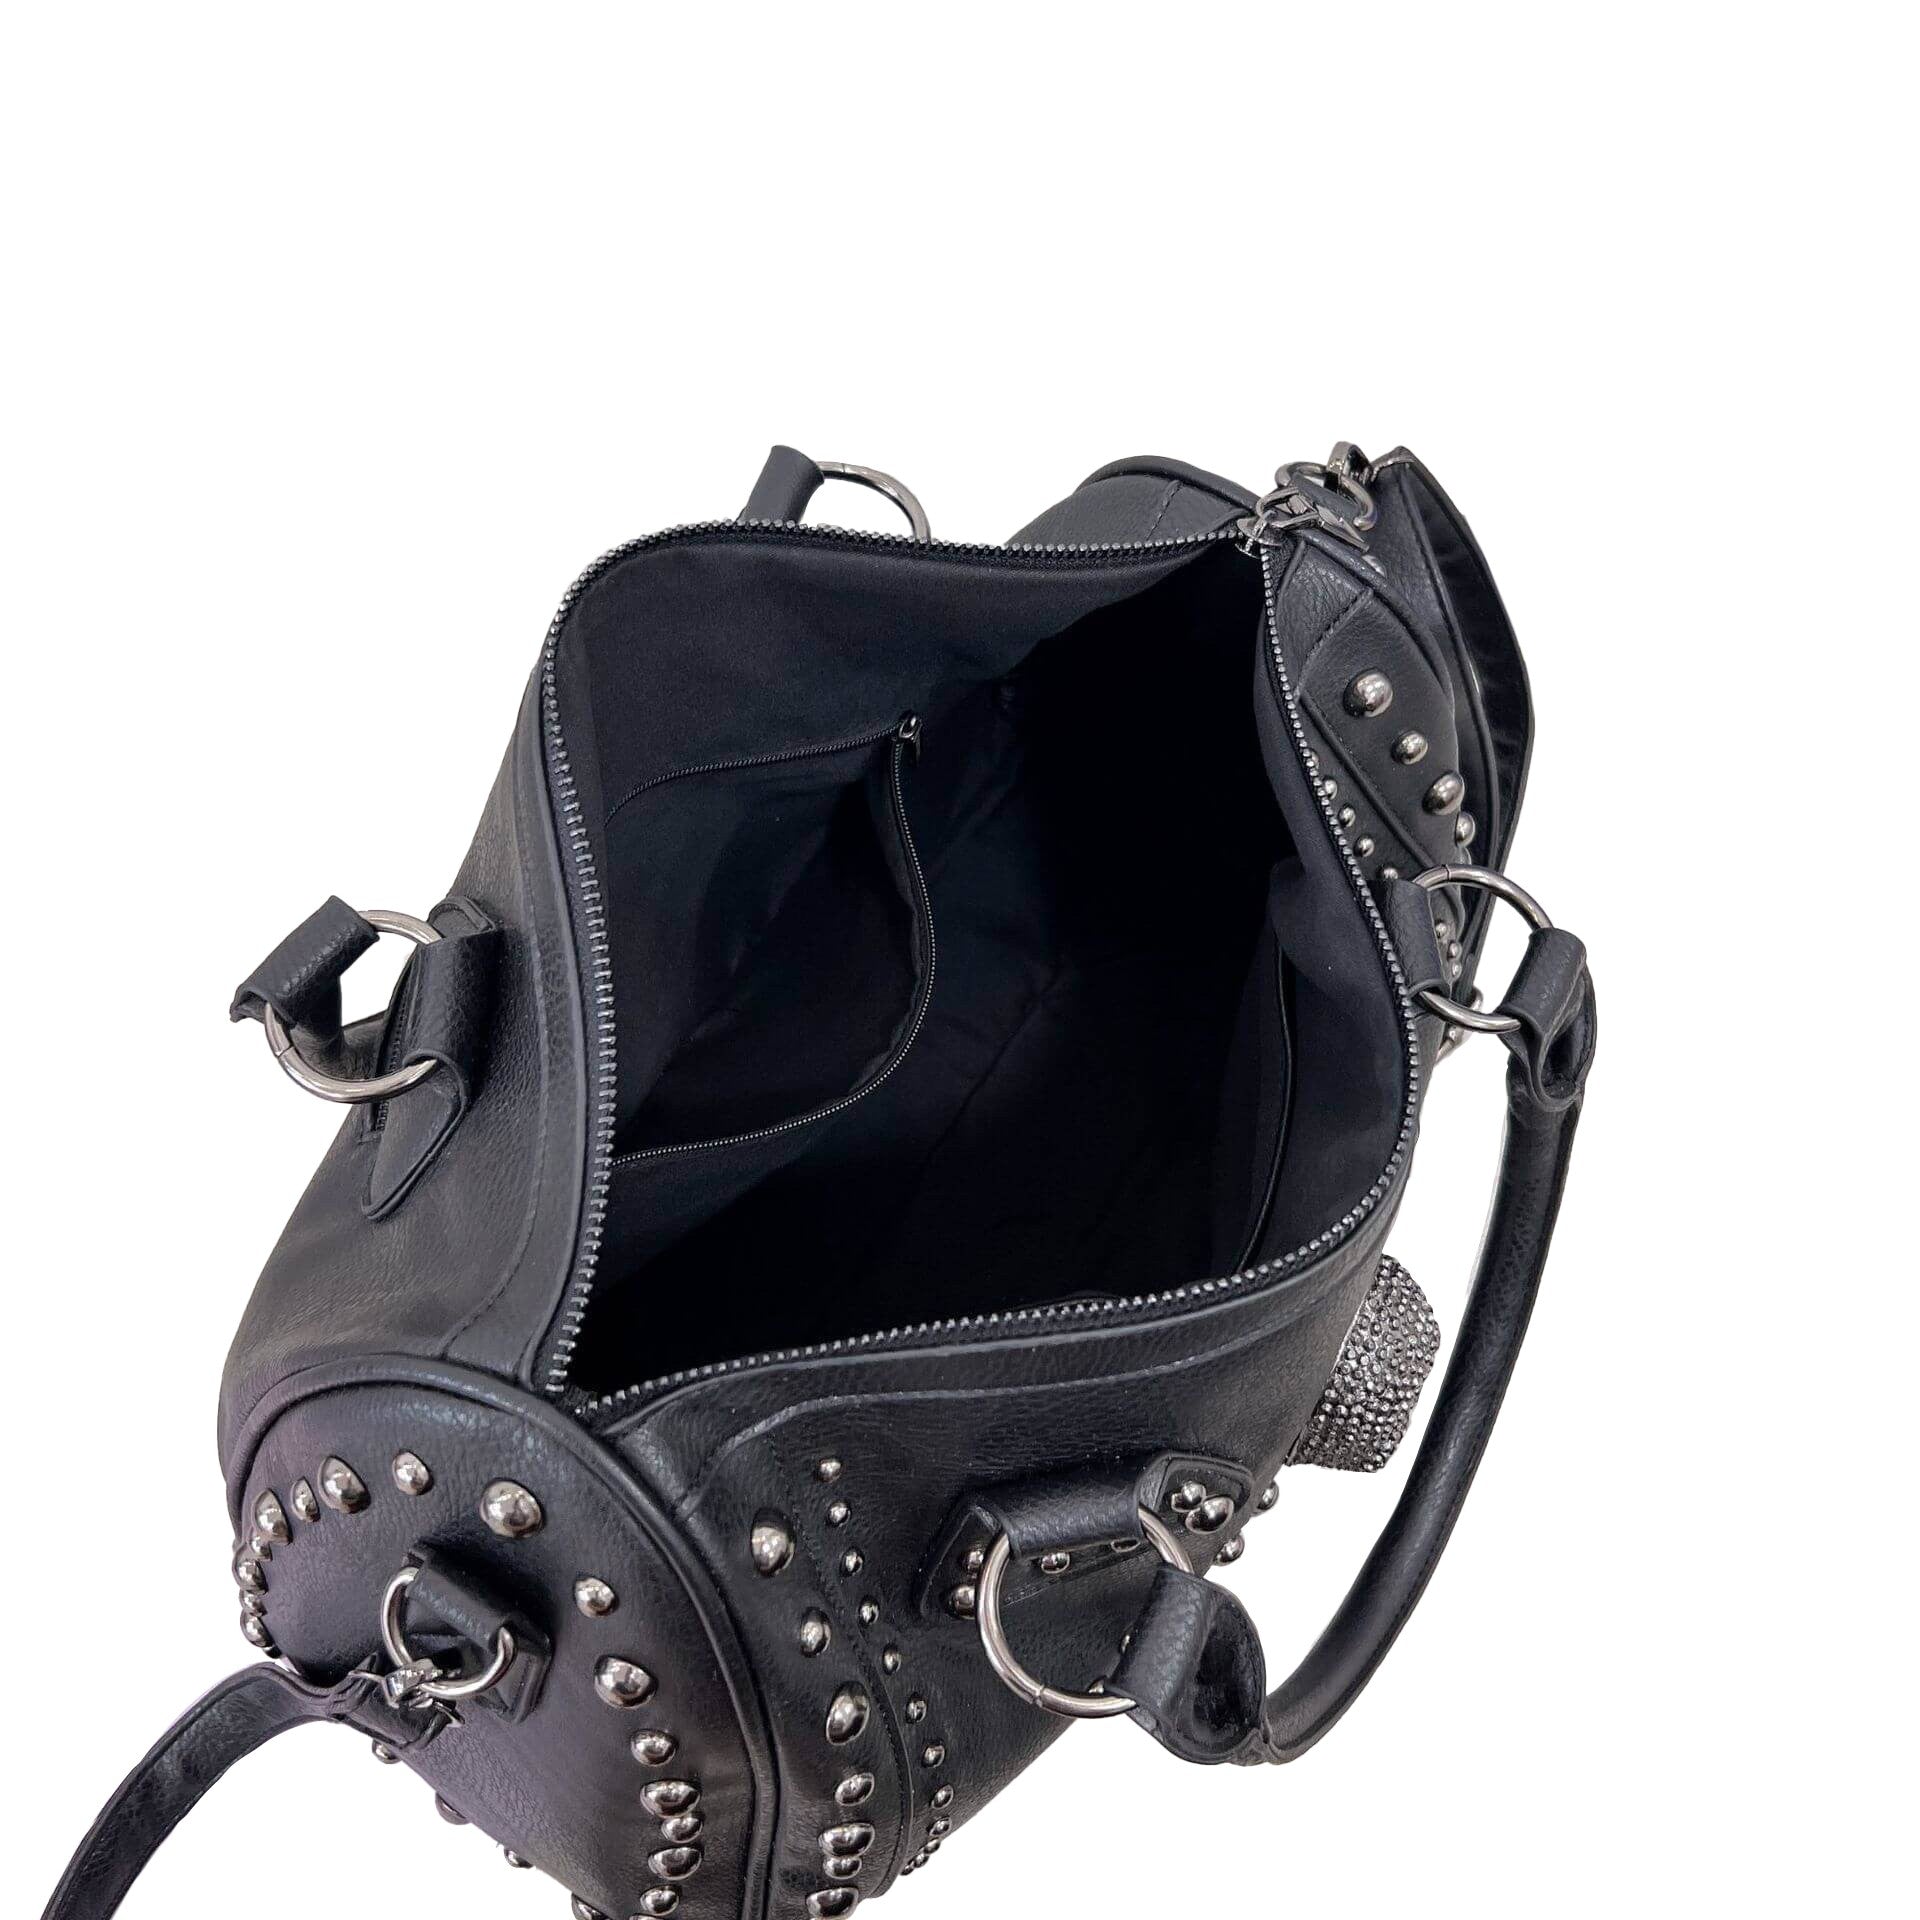 Ro Rox Rogue Large Studded Skull Faux Leather Gothic Bag